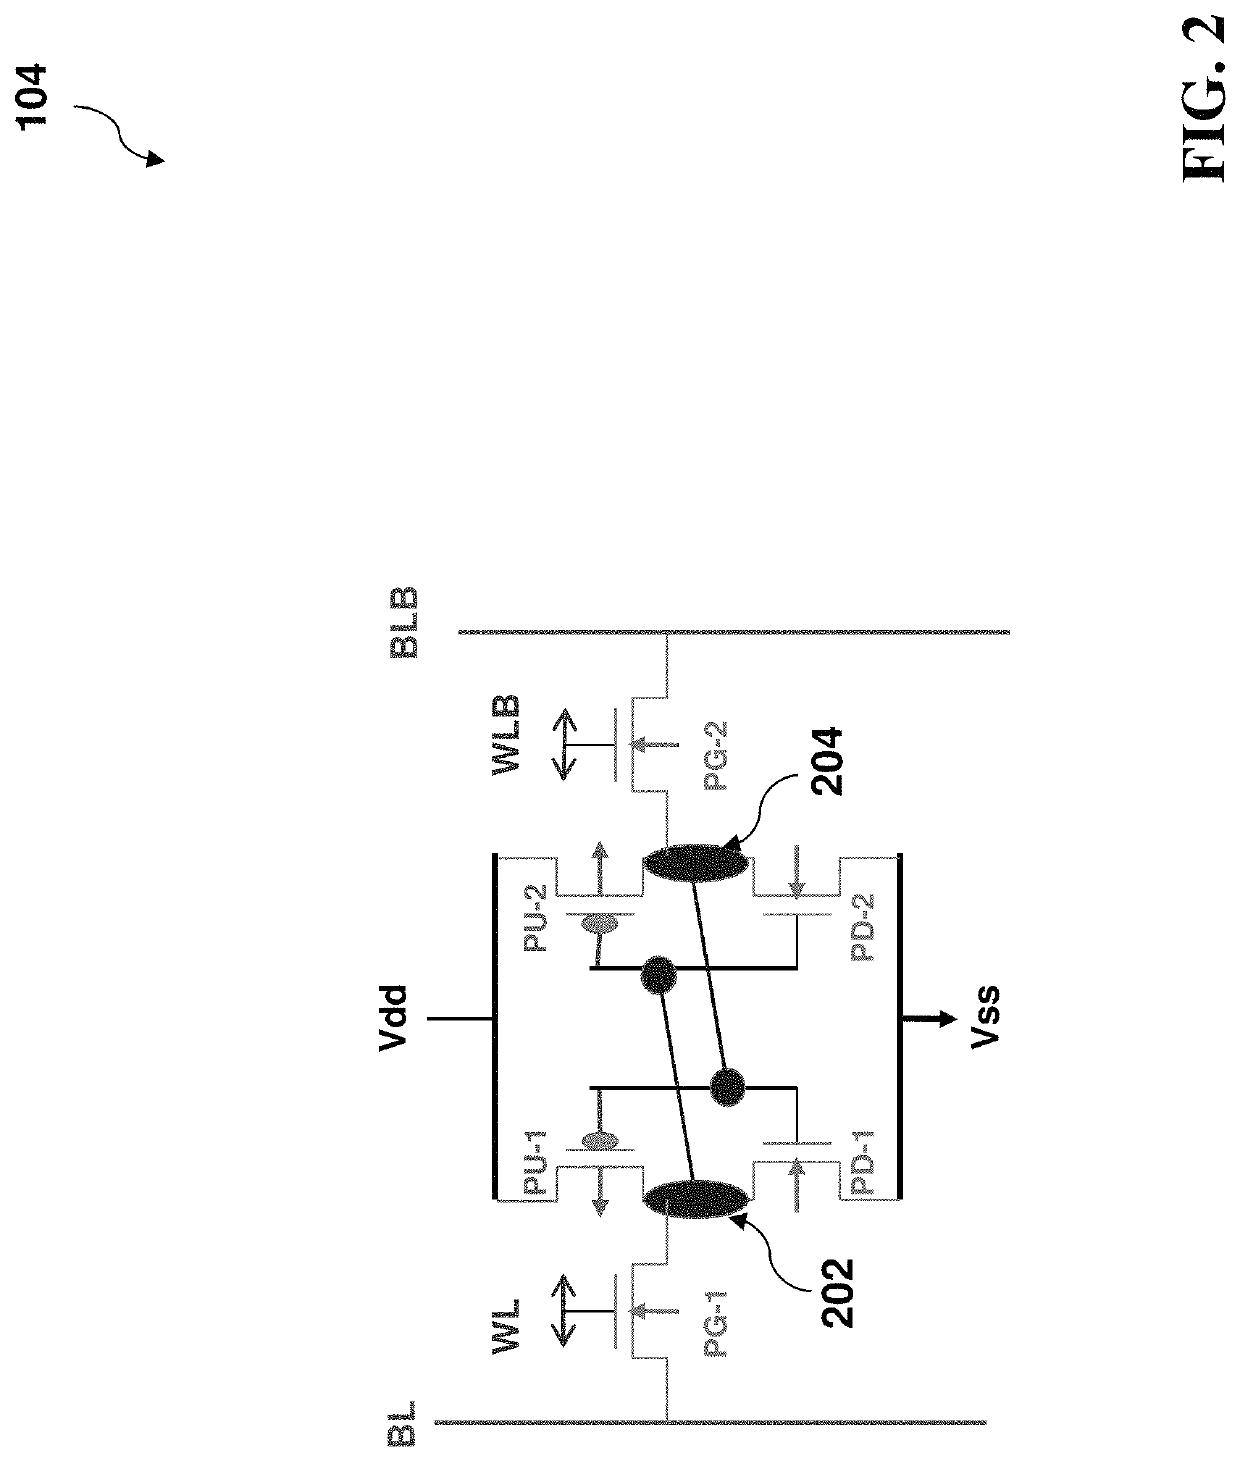 SRAM structure and connection